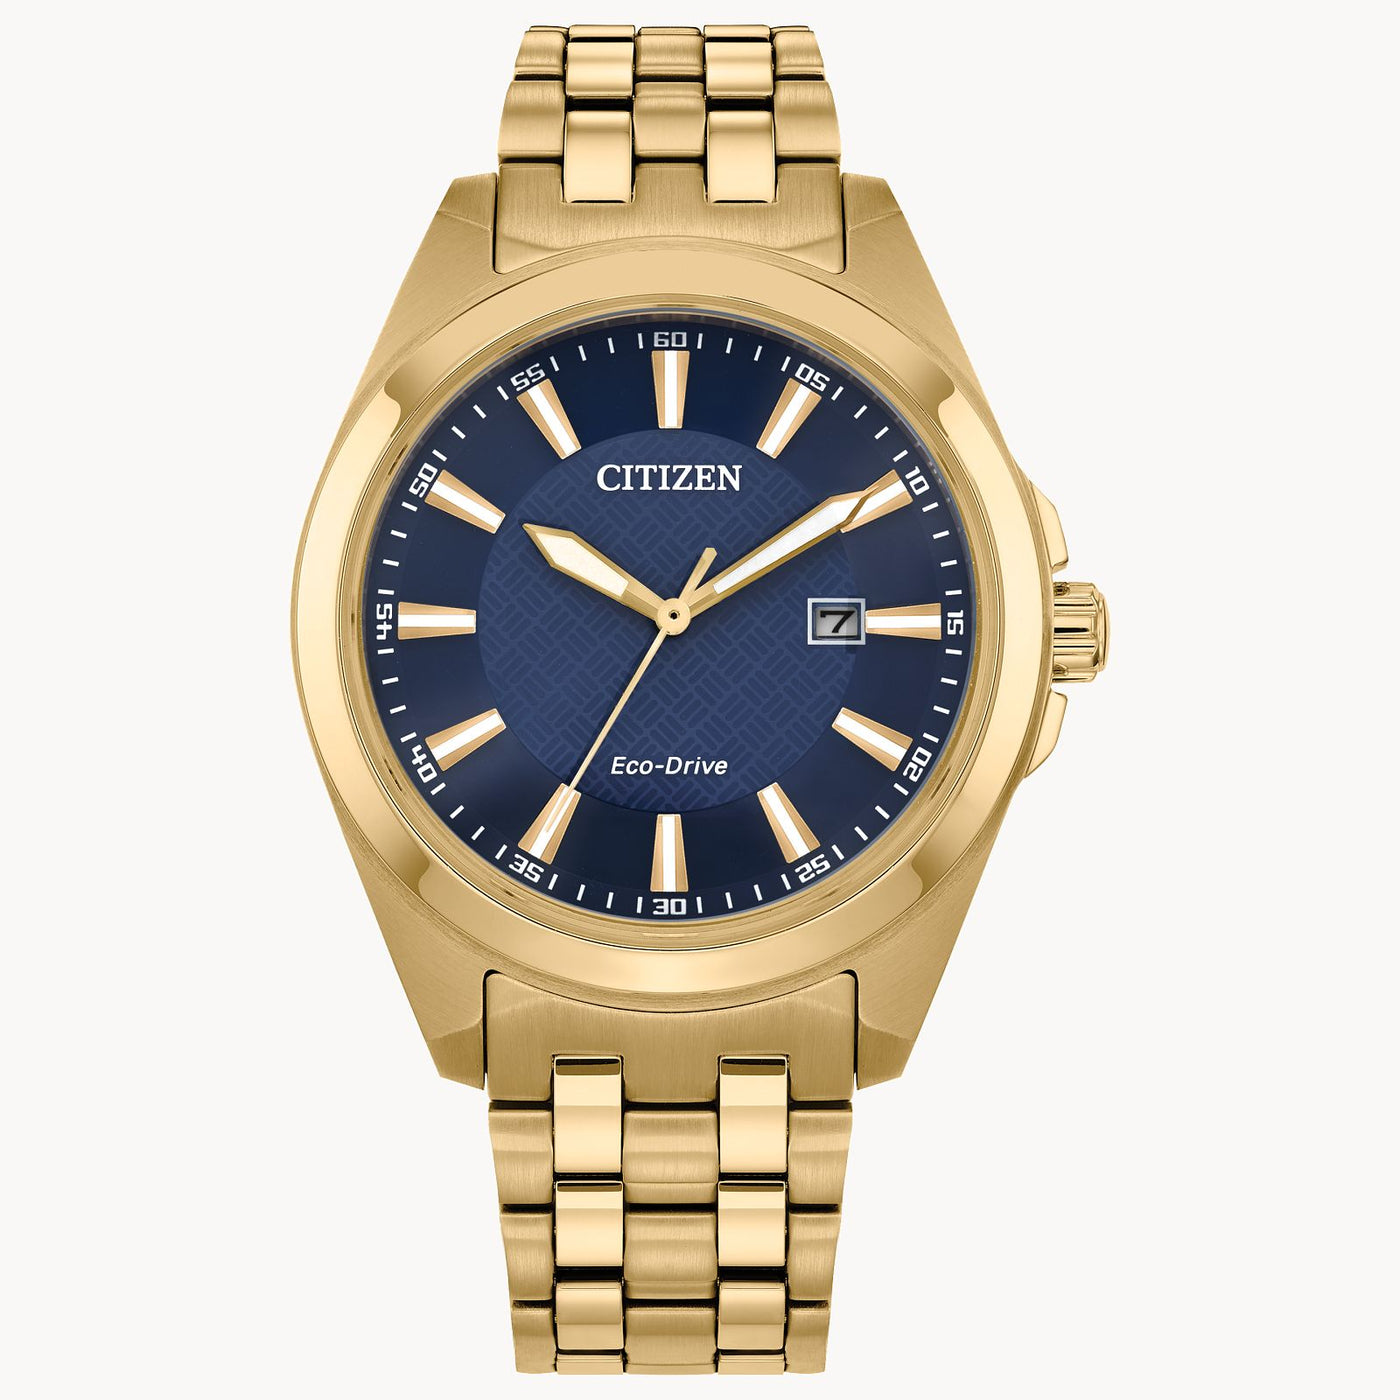 Mens analogue eco drive gold blue watches-him-dress (w-002-01) watch